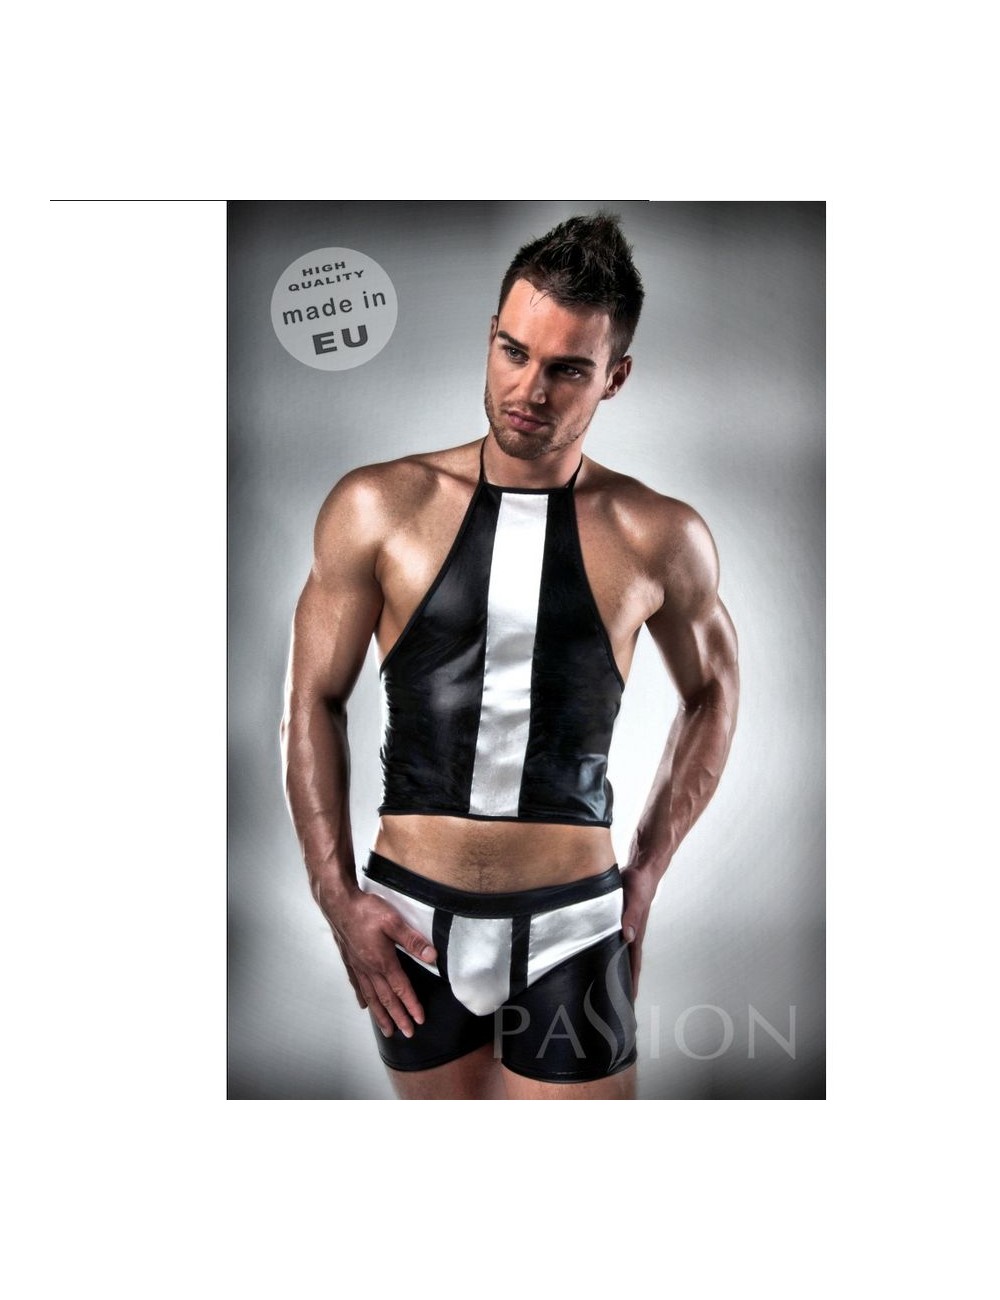 COMPLETO CAMERIERE SEXY BY PASSION MEN LINGERIE S / M